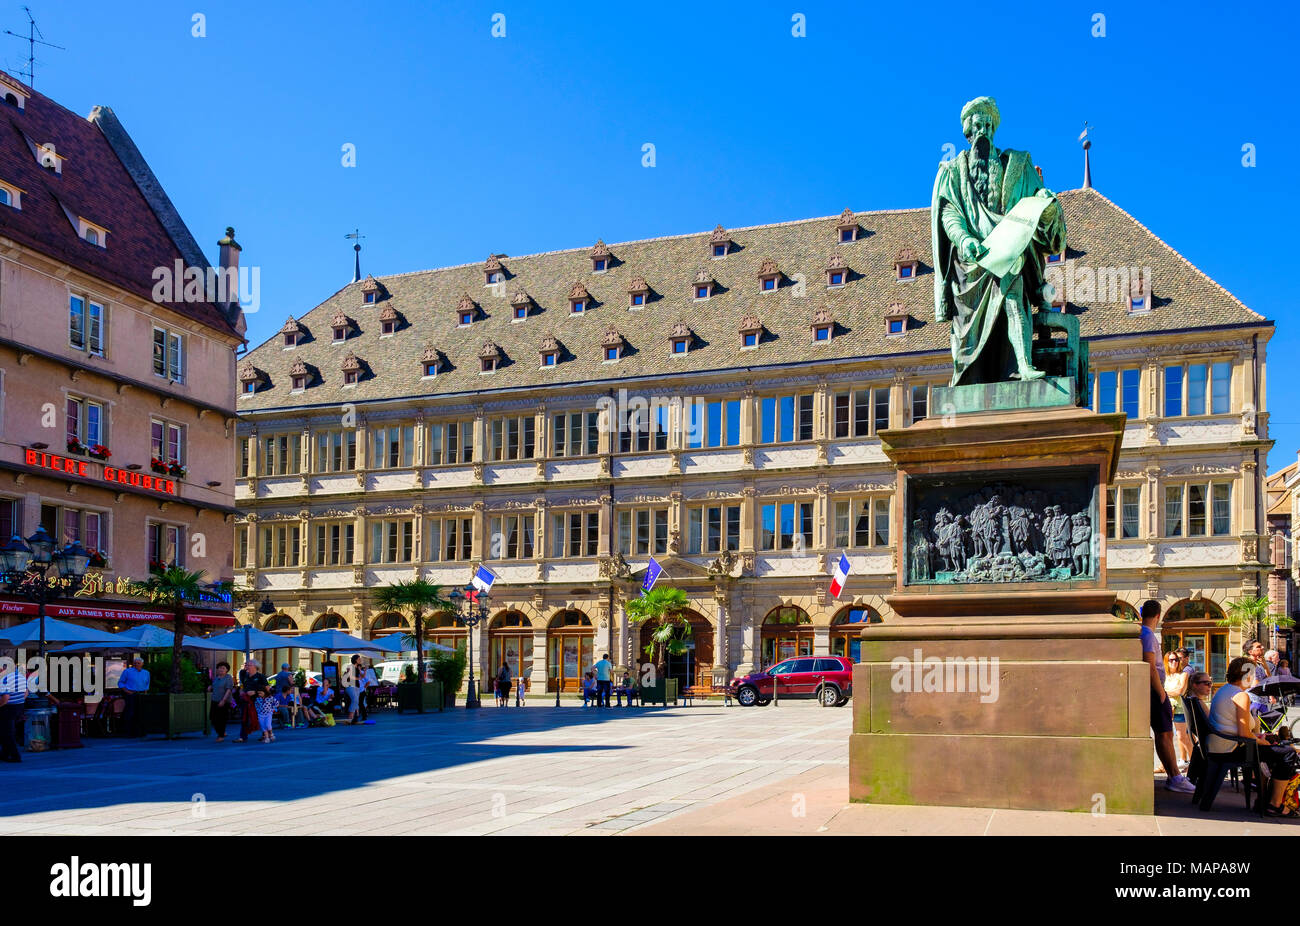 Chamber of Commerce building, Gutenberg statue, Place Gutenberg square, Strasbourg, Alsace, France, Europe, Stock Photo